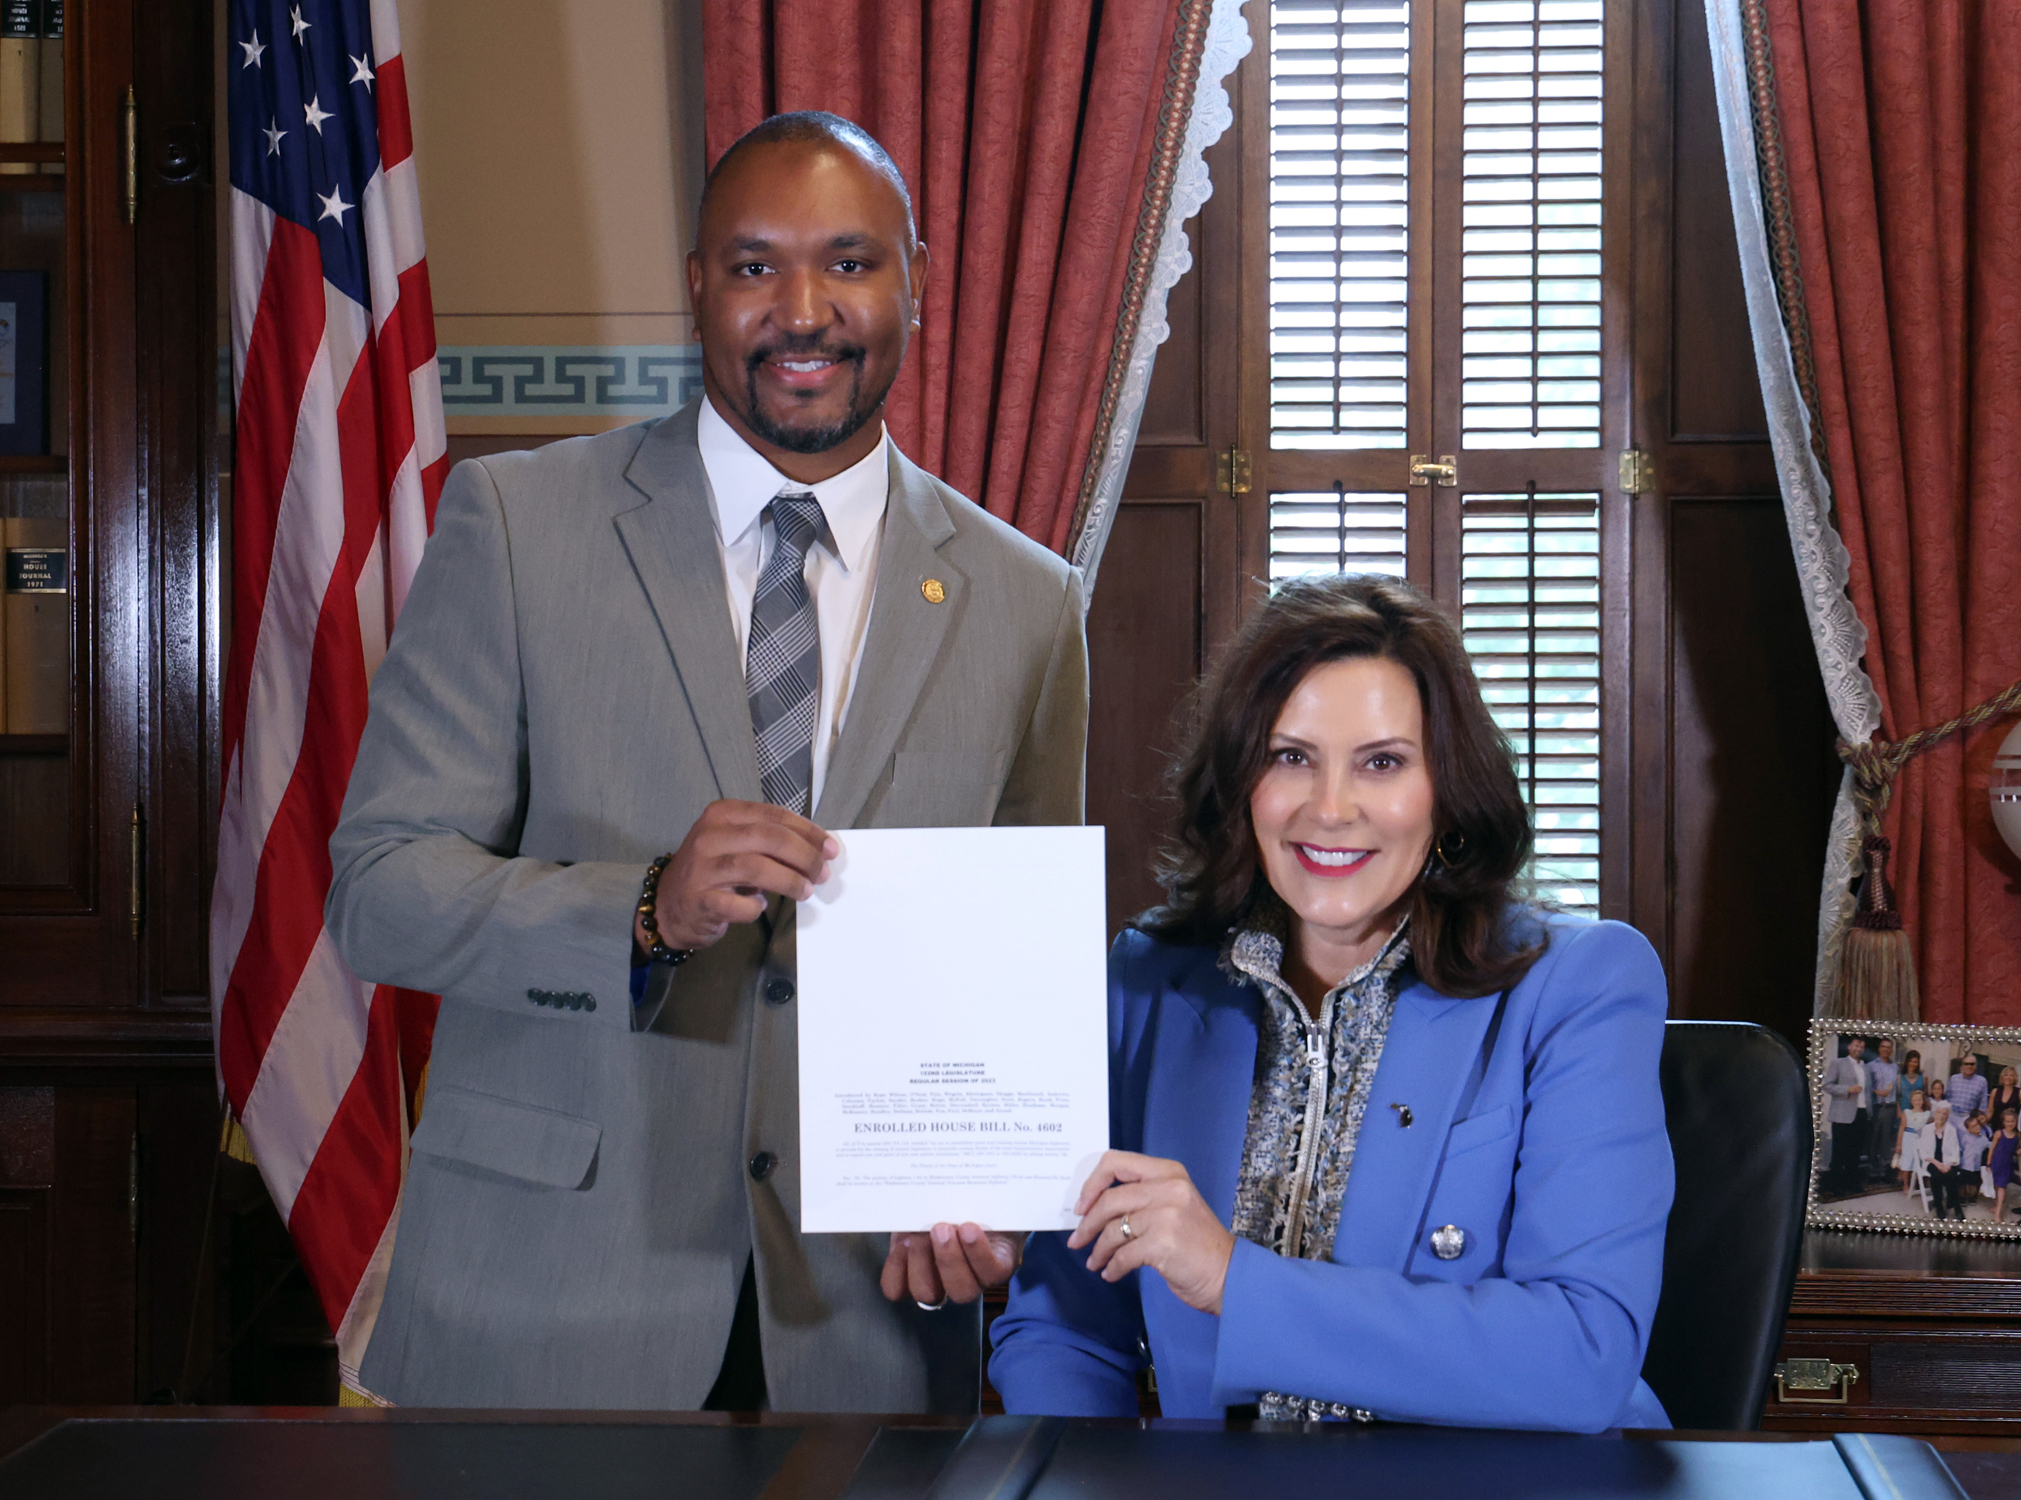 State Representative Jimmy Wilson with Governor Whitmer